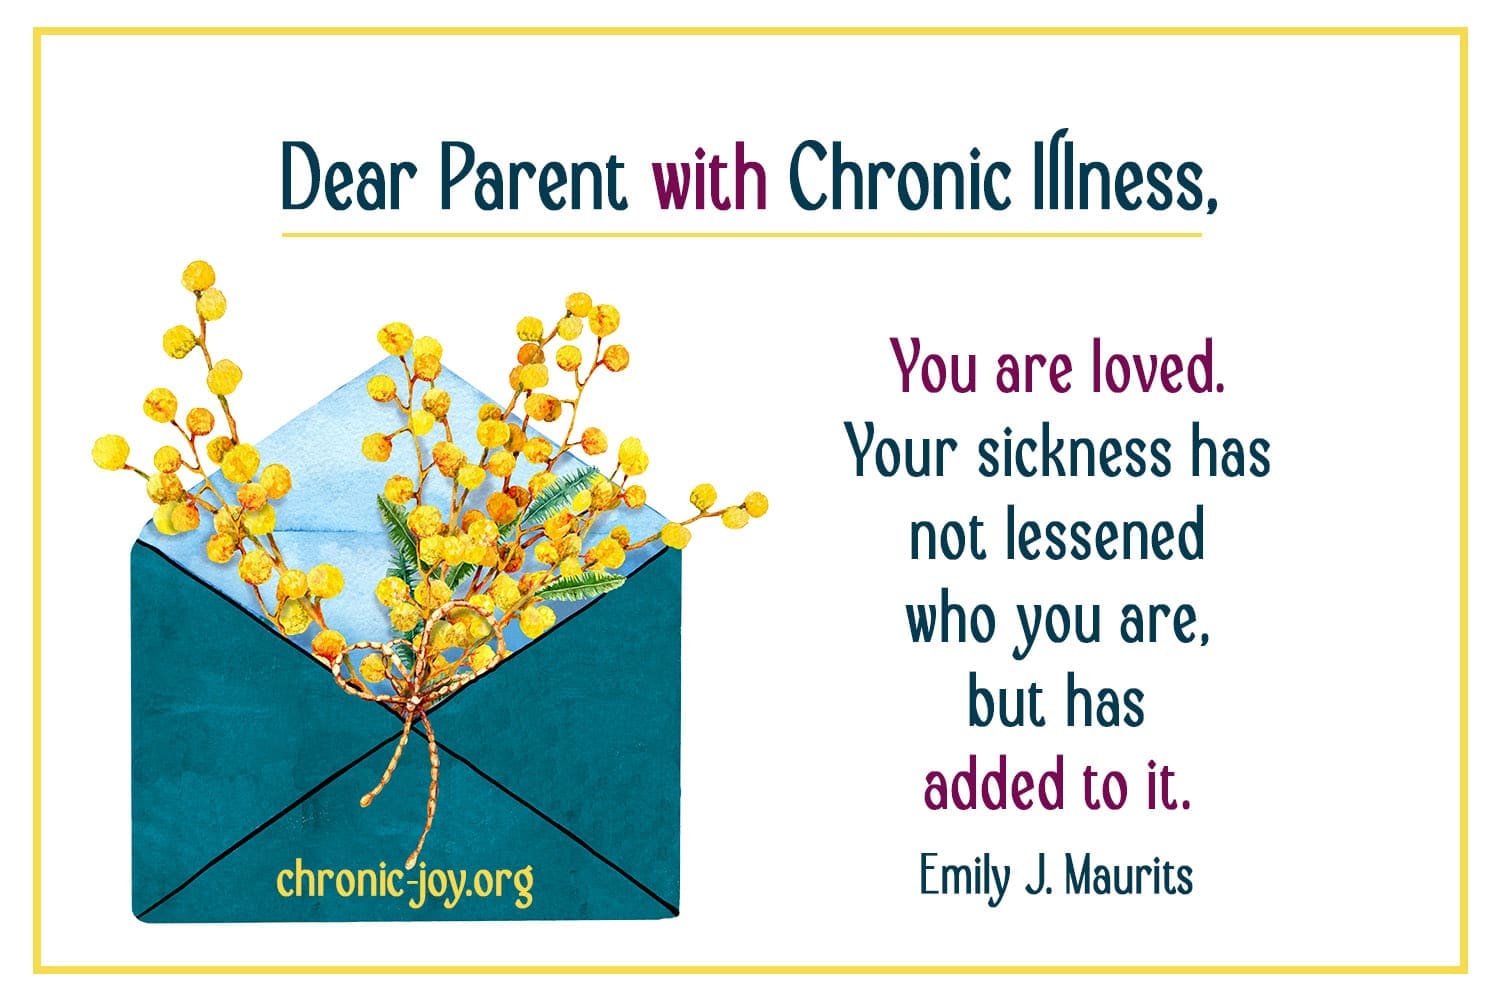 Parenting with chronic illness makes us more, not less.